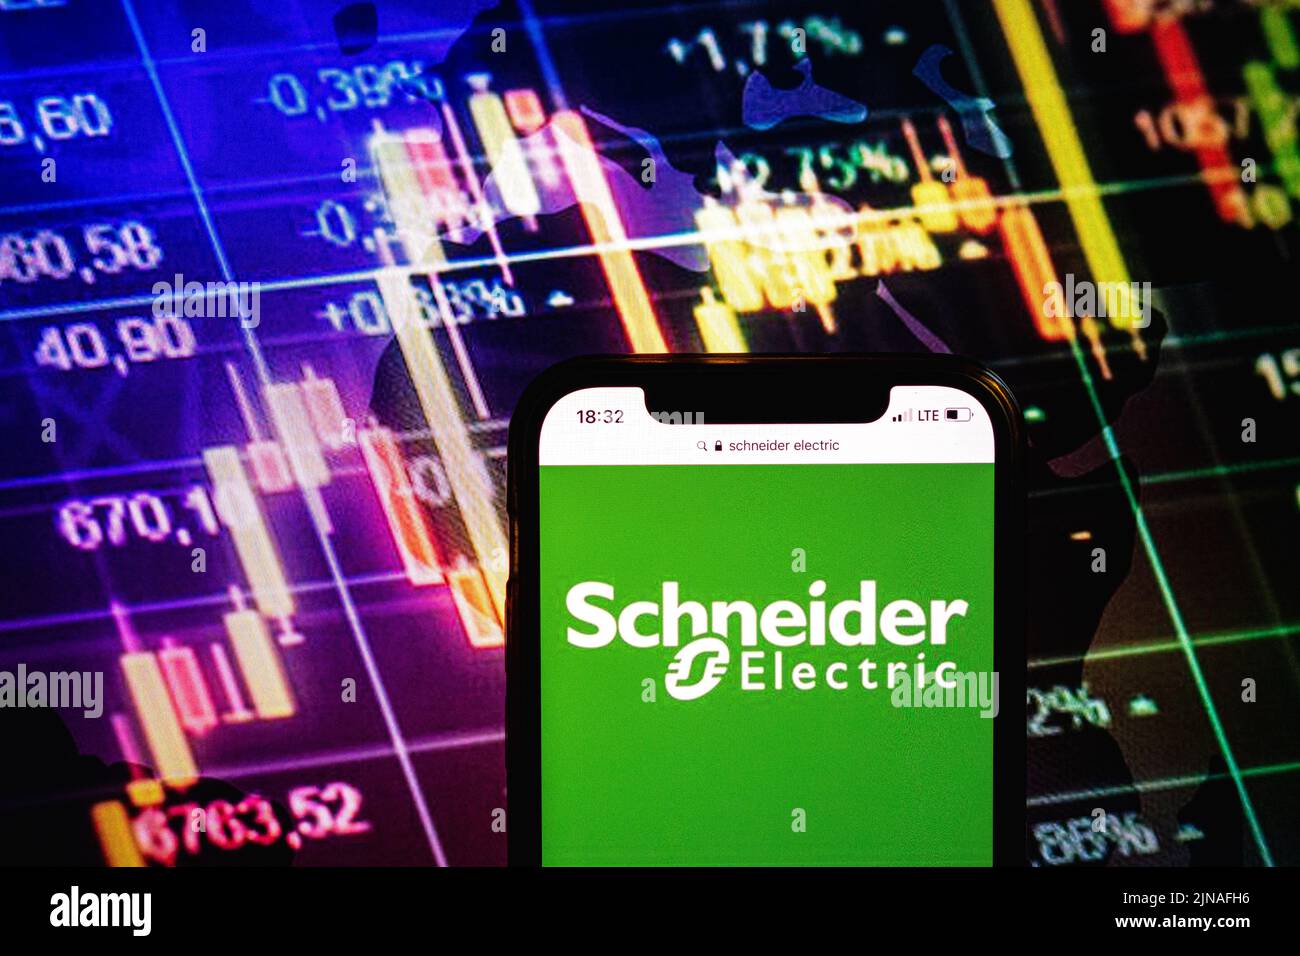 KONSKIE, POLAND - August 09, 2022: Smartphone displaying logo of Schneider Electric company on stock exchange diagram background Stock Photo